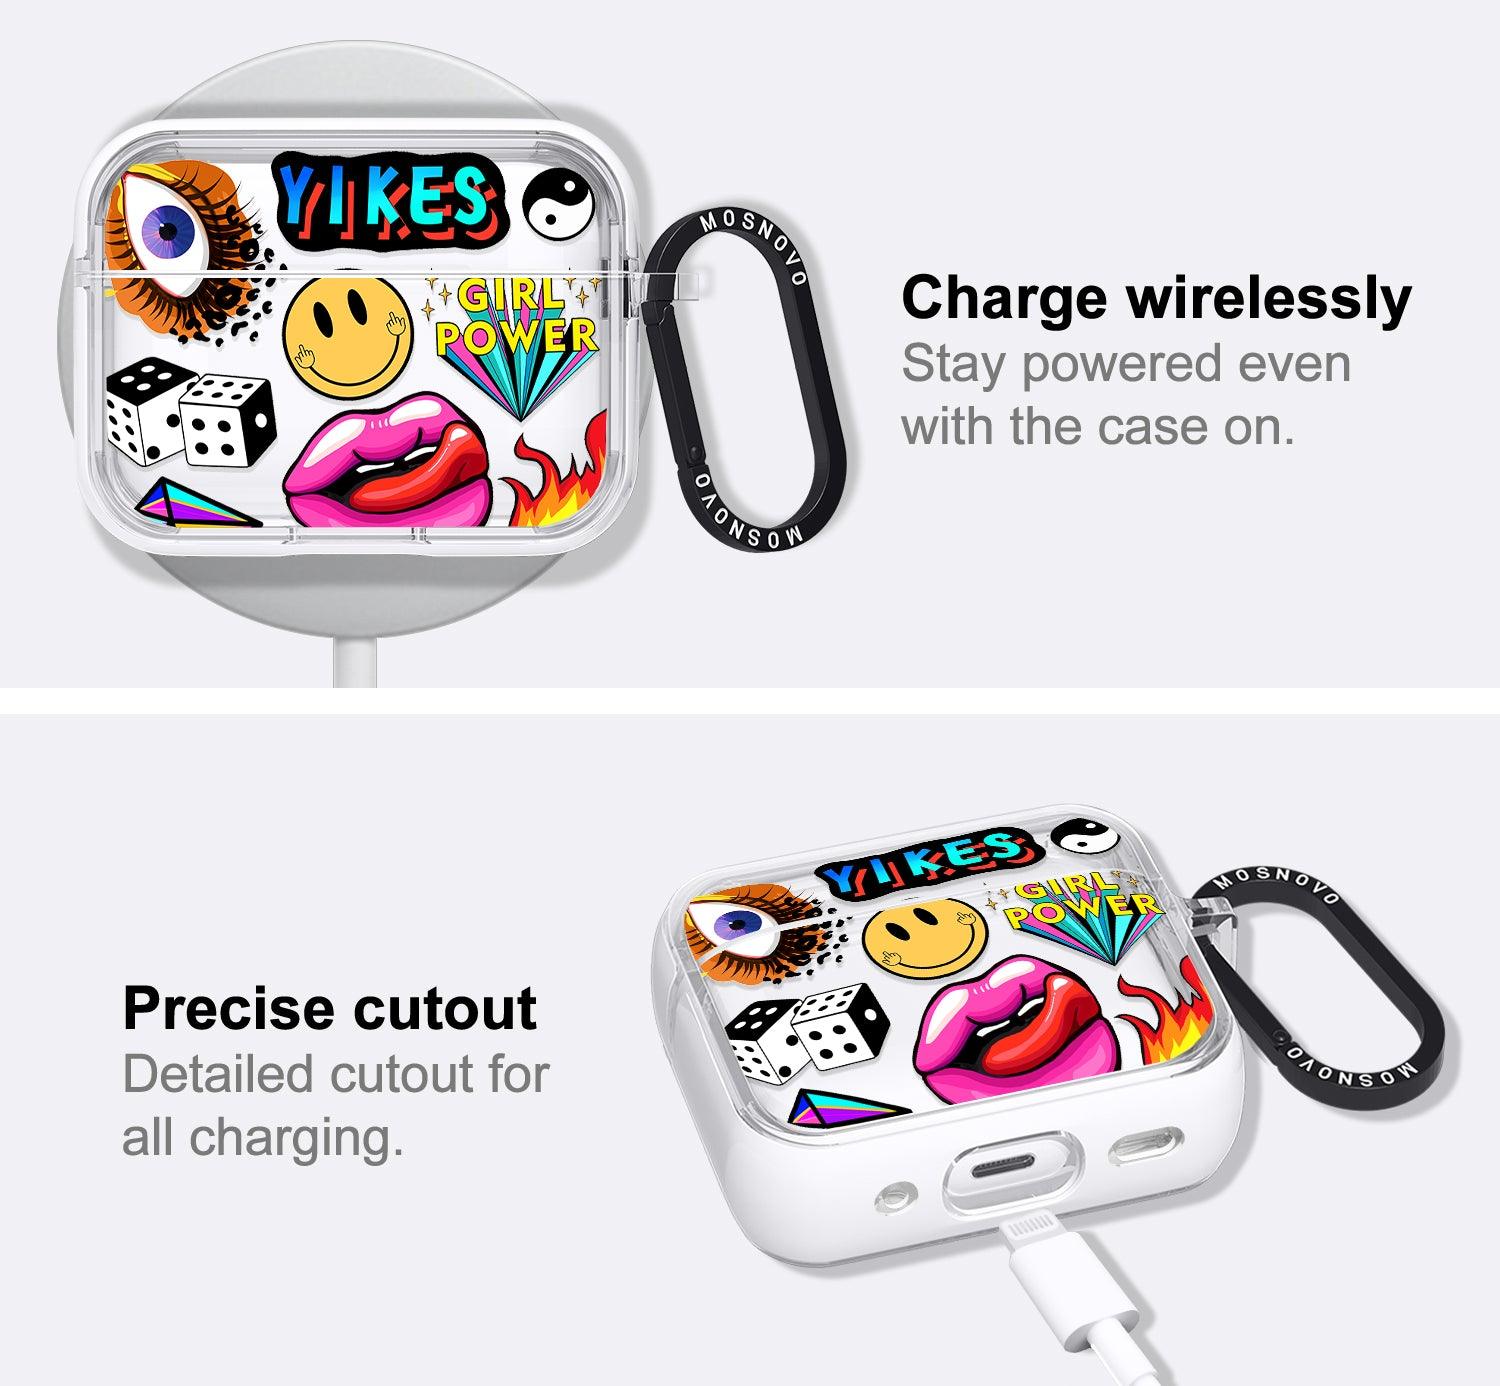 Funky Stickers AirPods Pro 2 Case (2nd Generation) - MOSNOVO